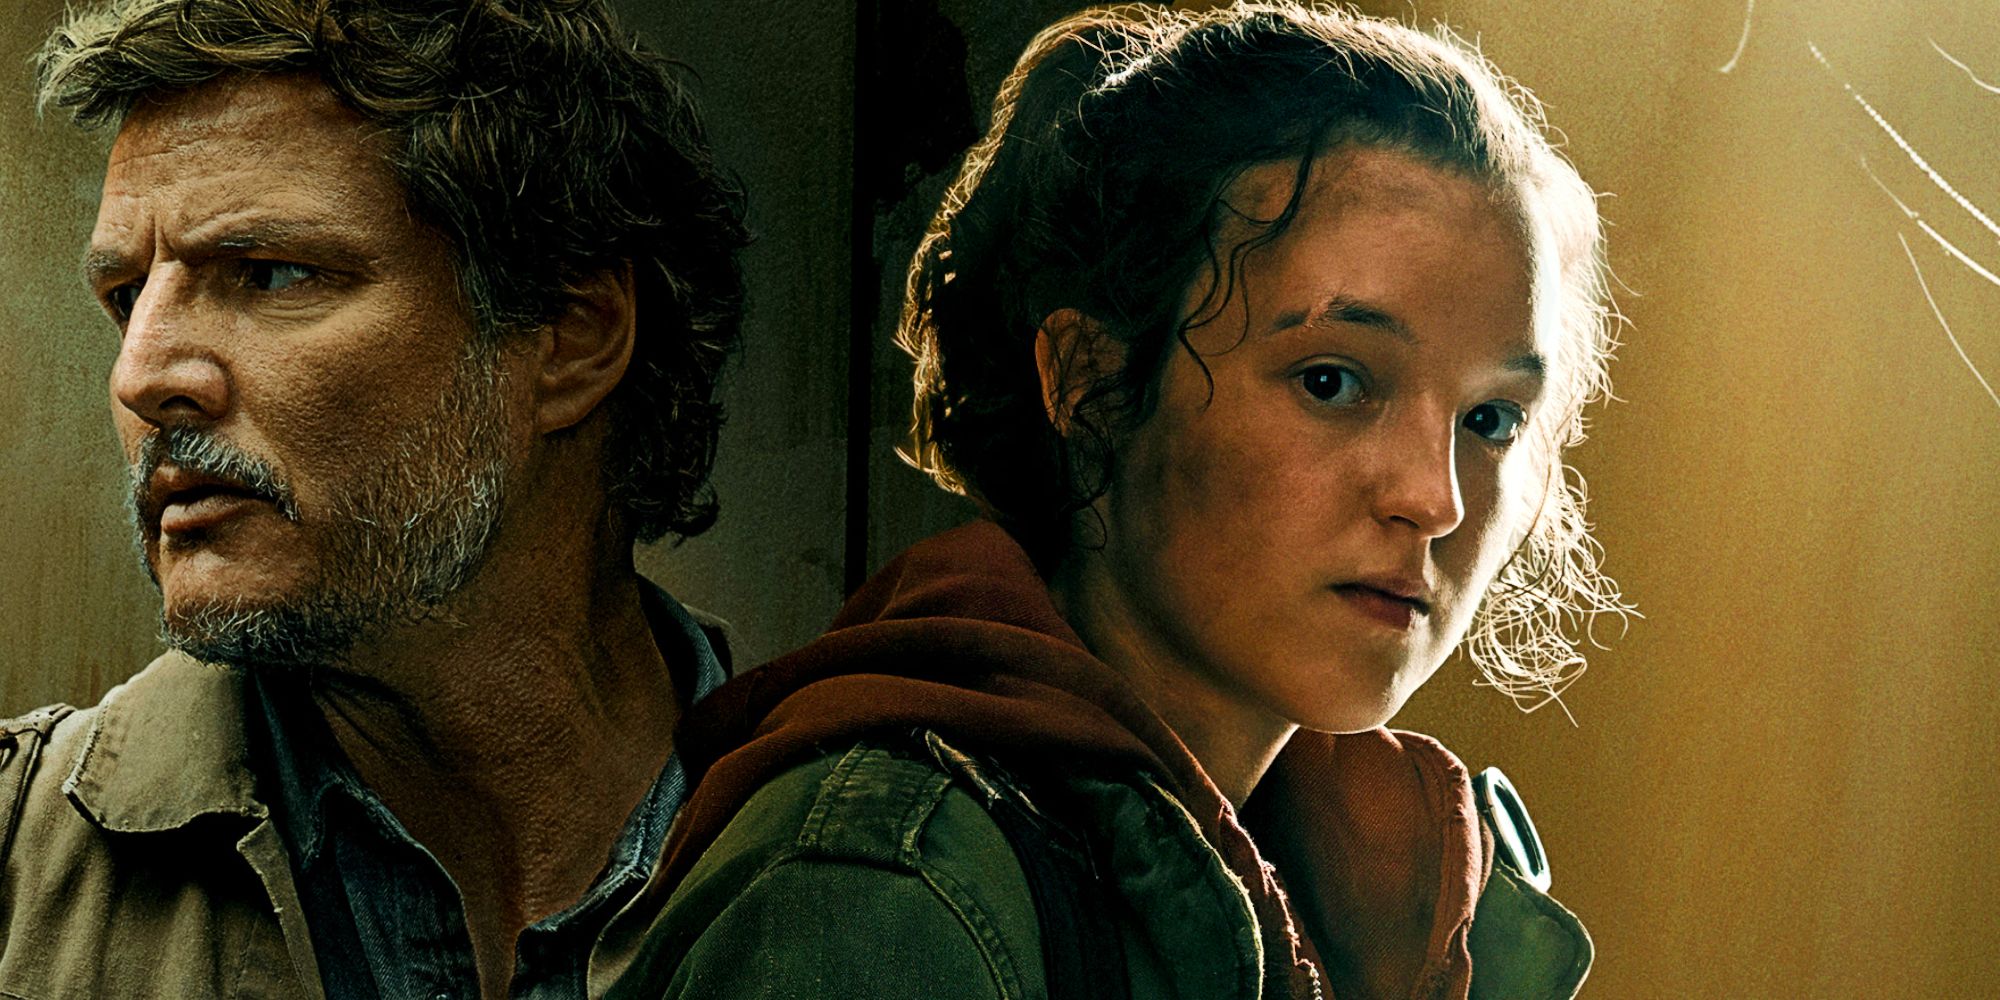 Pedro Pascal as Joel and Belle Ramsey as Ellie in HBO's The Last of Us